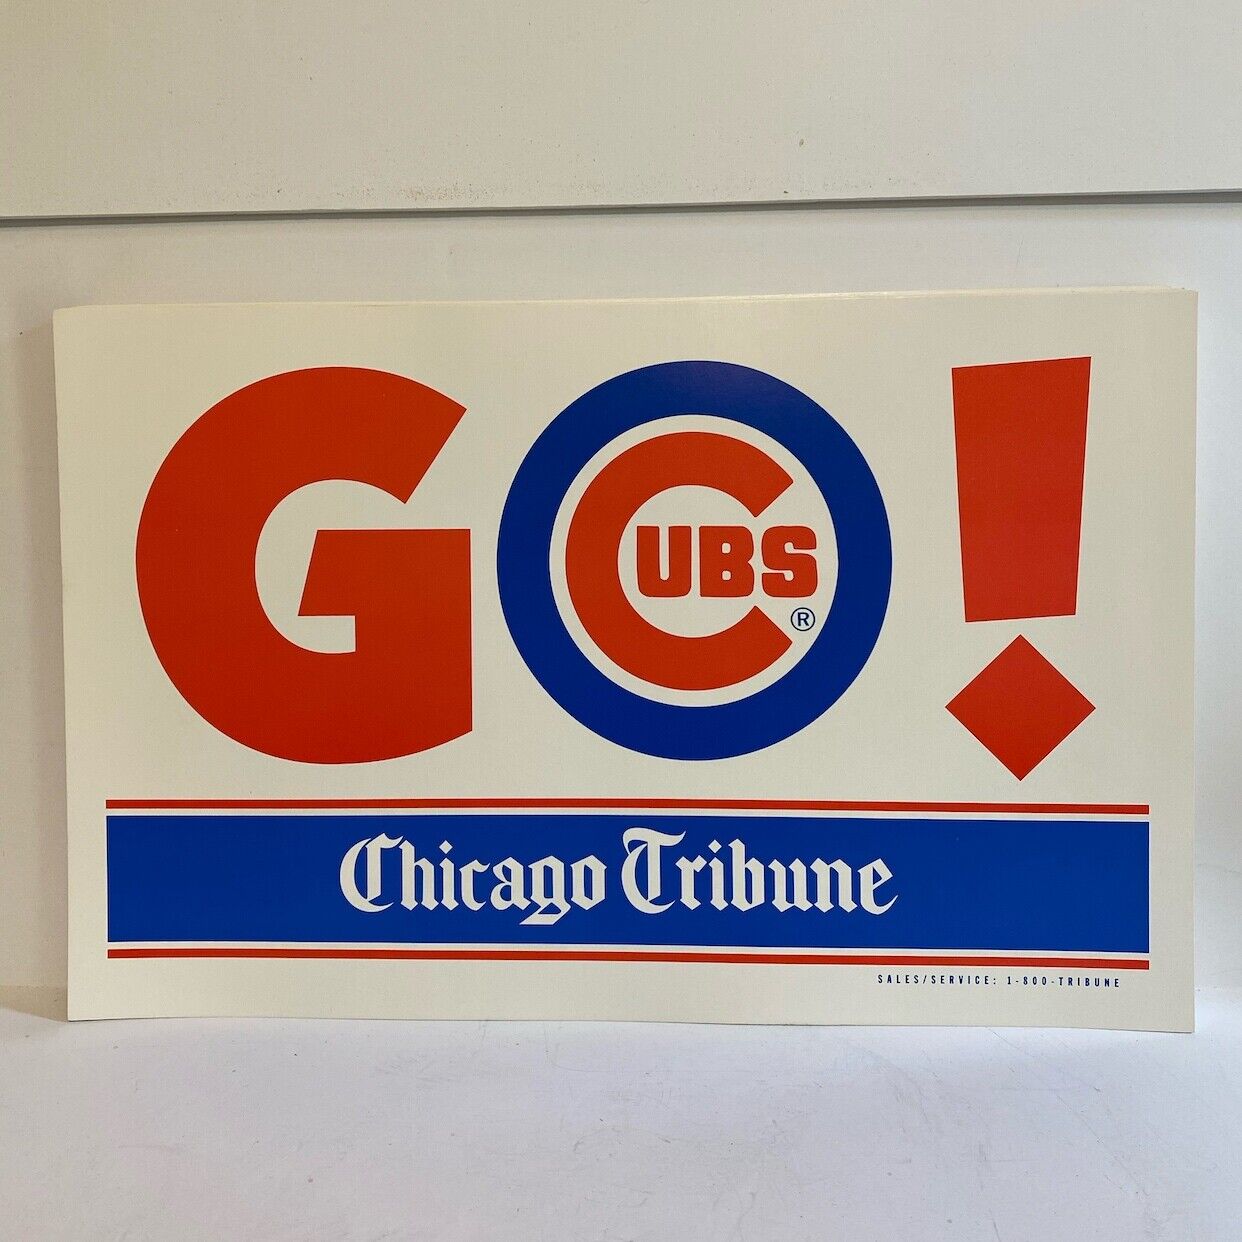 Vintage Go Cubs New products world's highest quality popular Chicago Tribune Sign Advertising Baseball Sales Weekly update